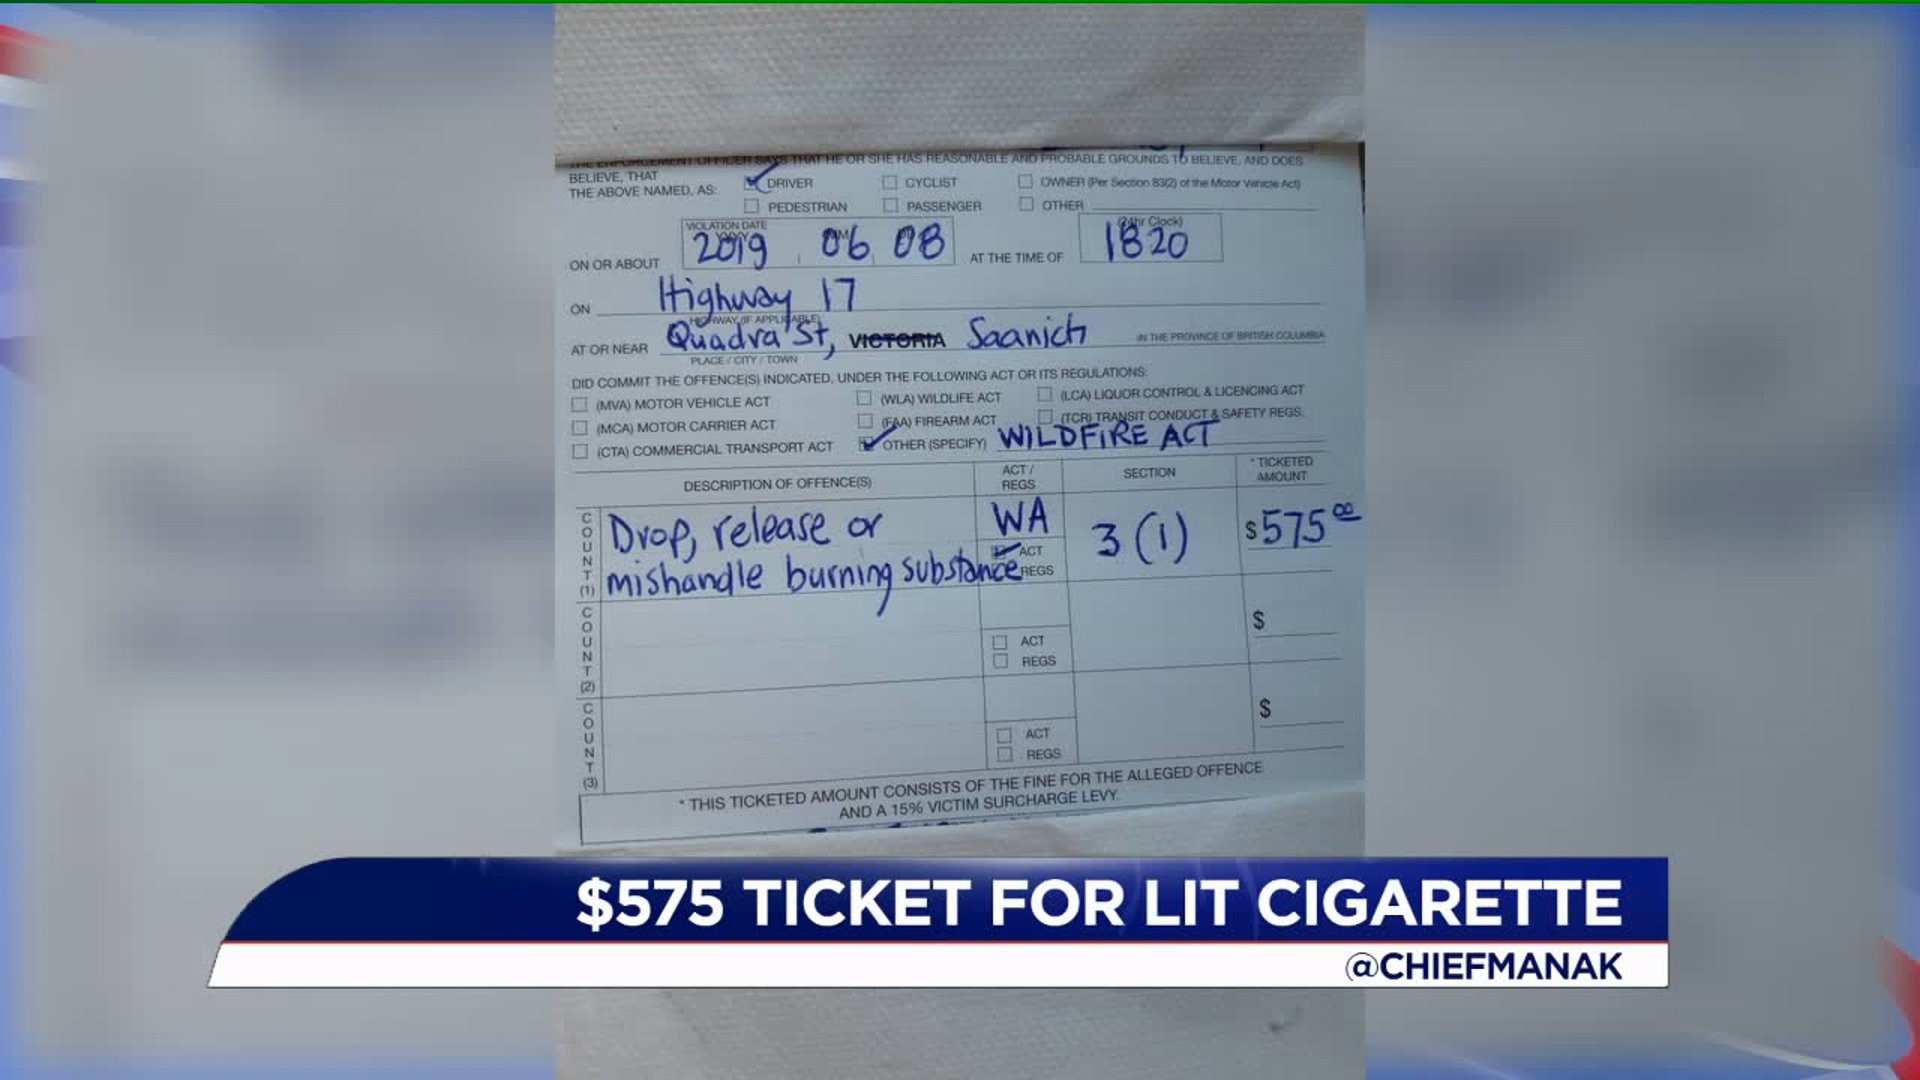 Police chief gives $575 ticket to driver for throwing lit cigarette out car window